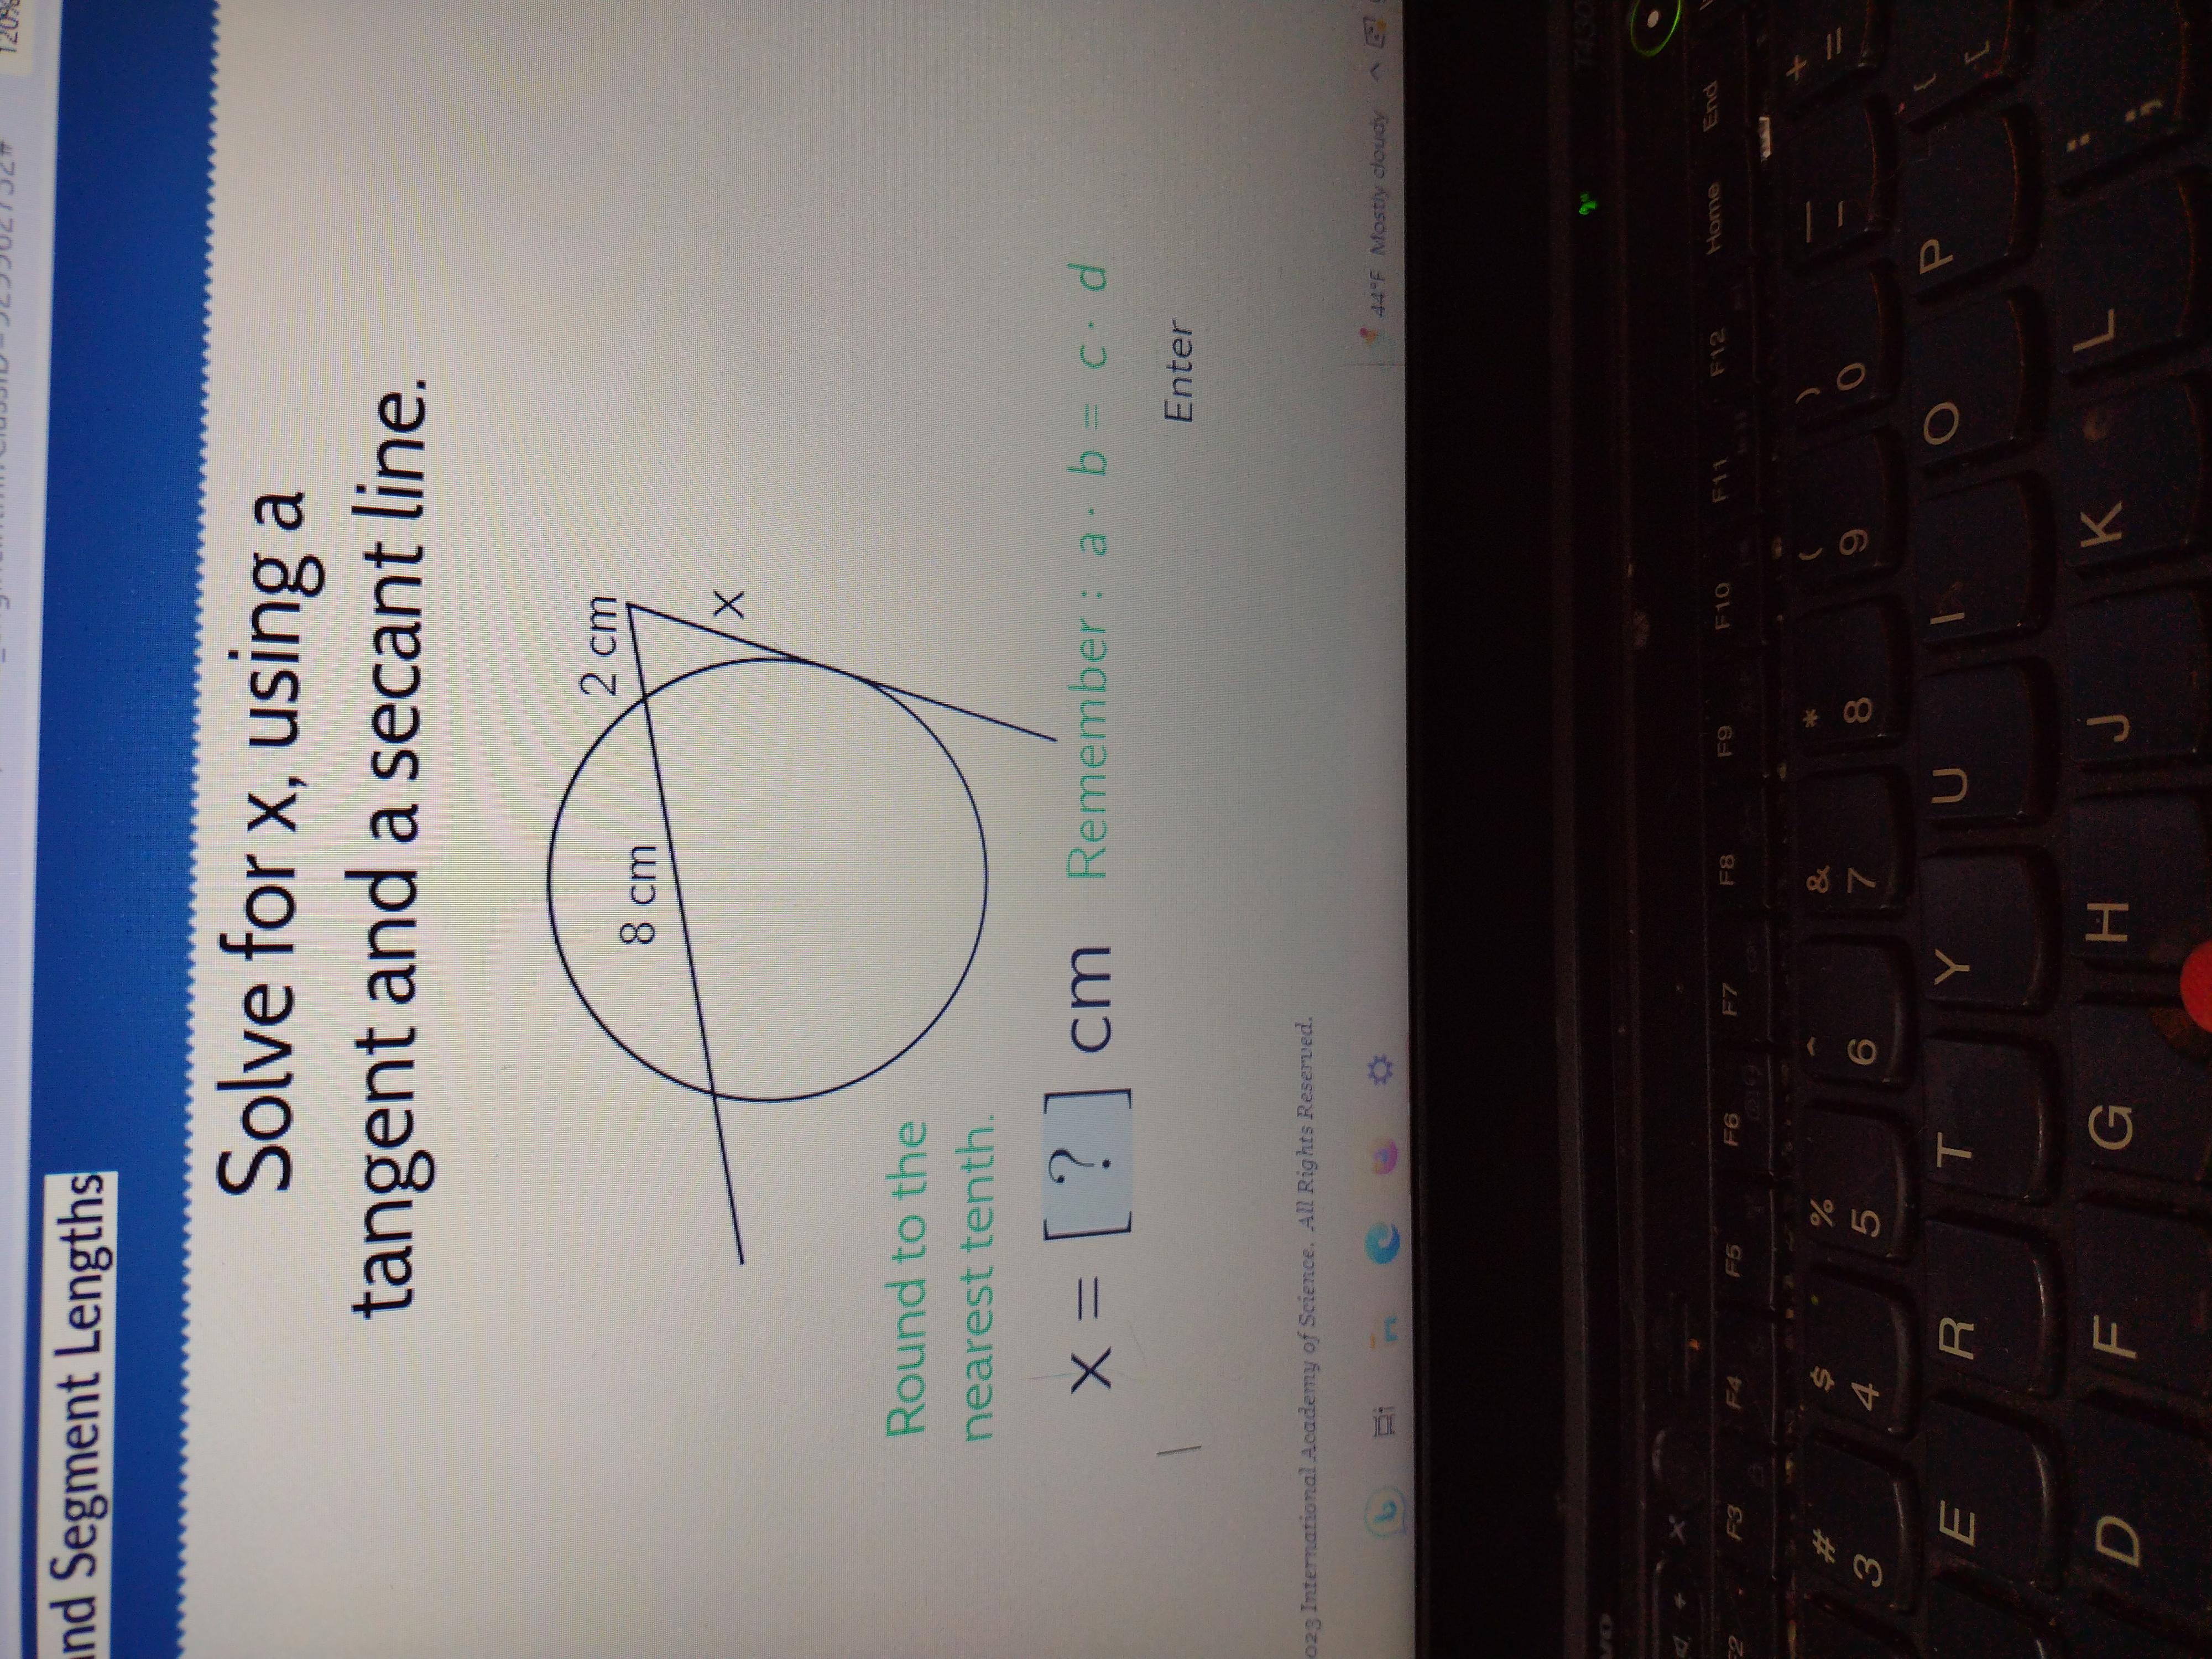 Solve For X, Using A Tangent And Secant Line